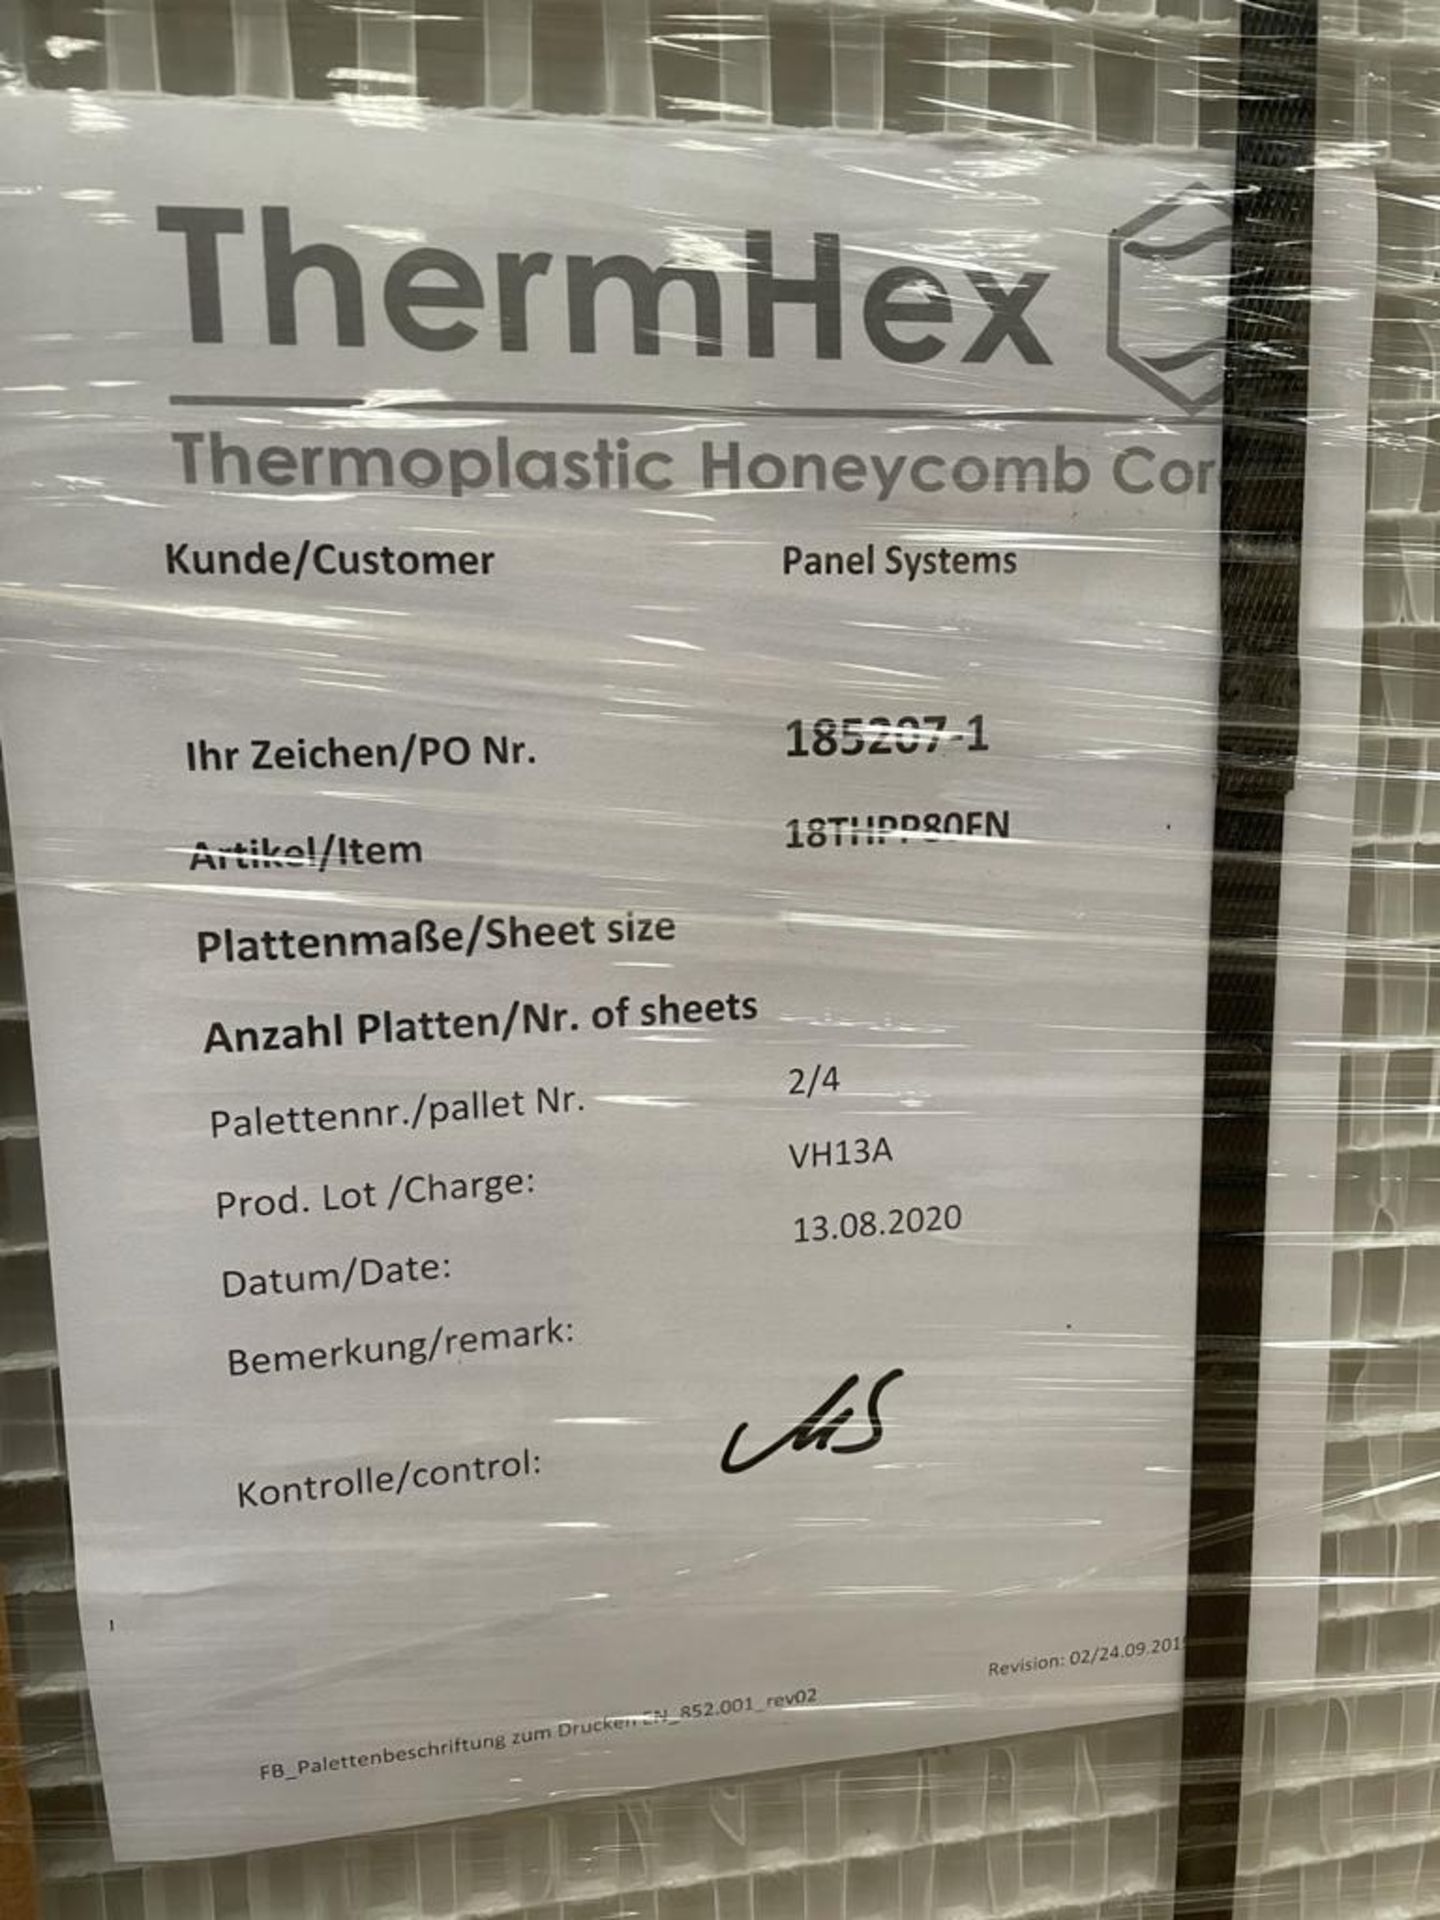 5 x ThermHex Thermoplastic Honeycomb Core Panels - Size 3175 x 1210 x 18mm - New Stock - Lightweight - Image 2 of 8